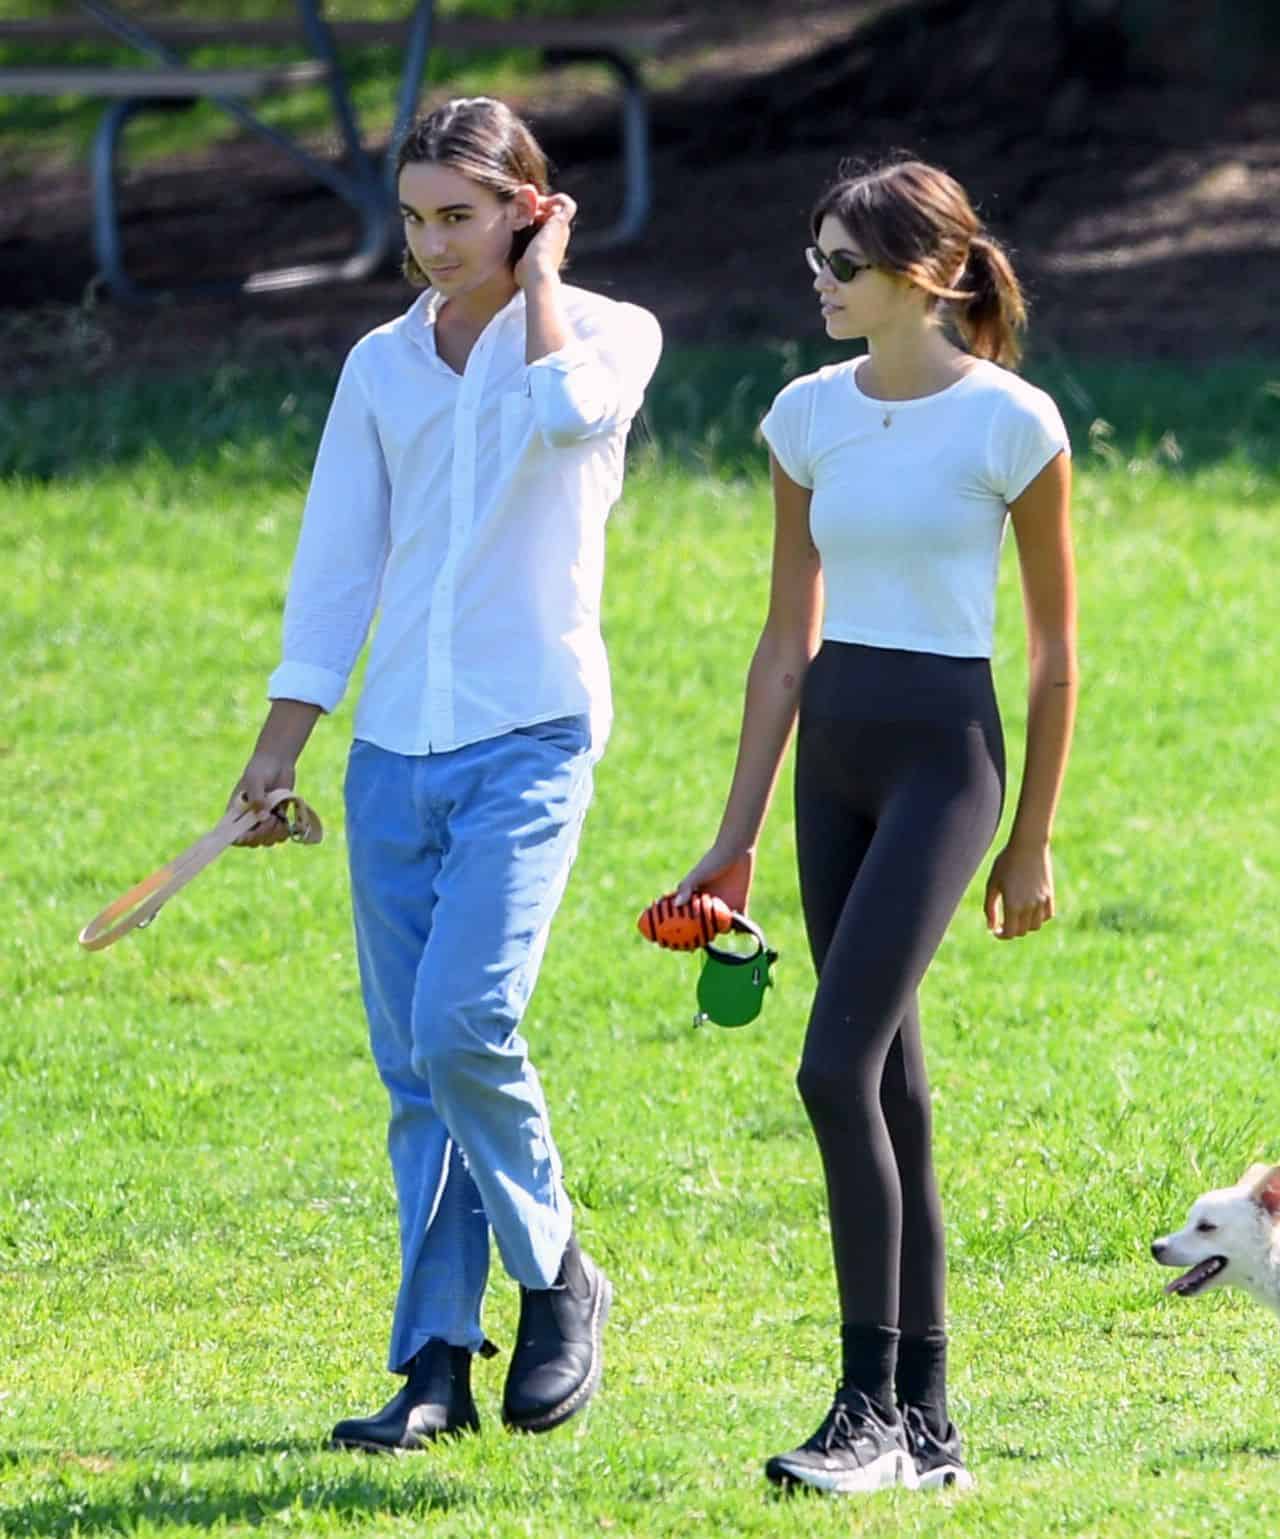 kaia gerber at a dog park in los angeles with male friend 2